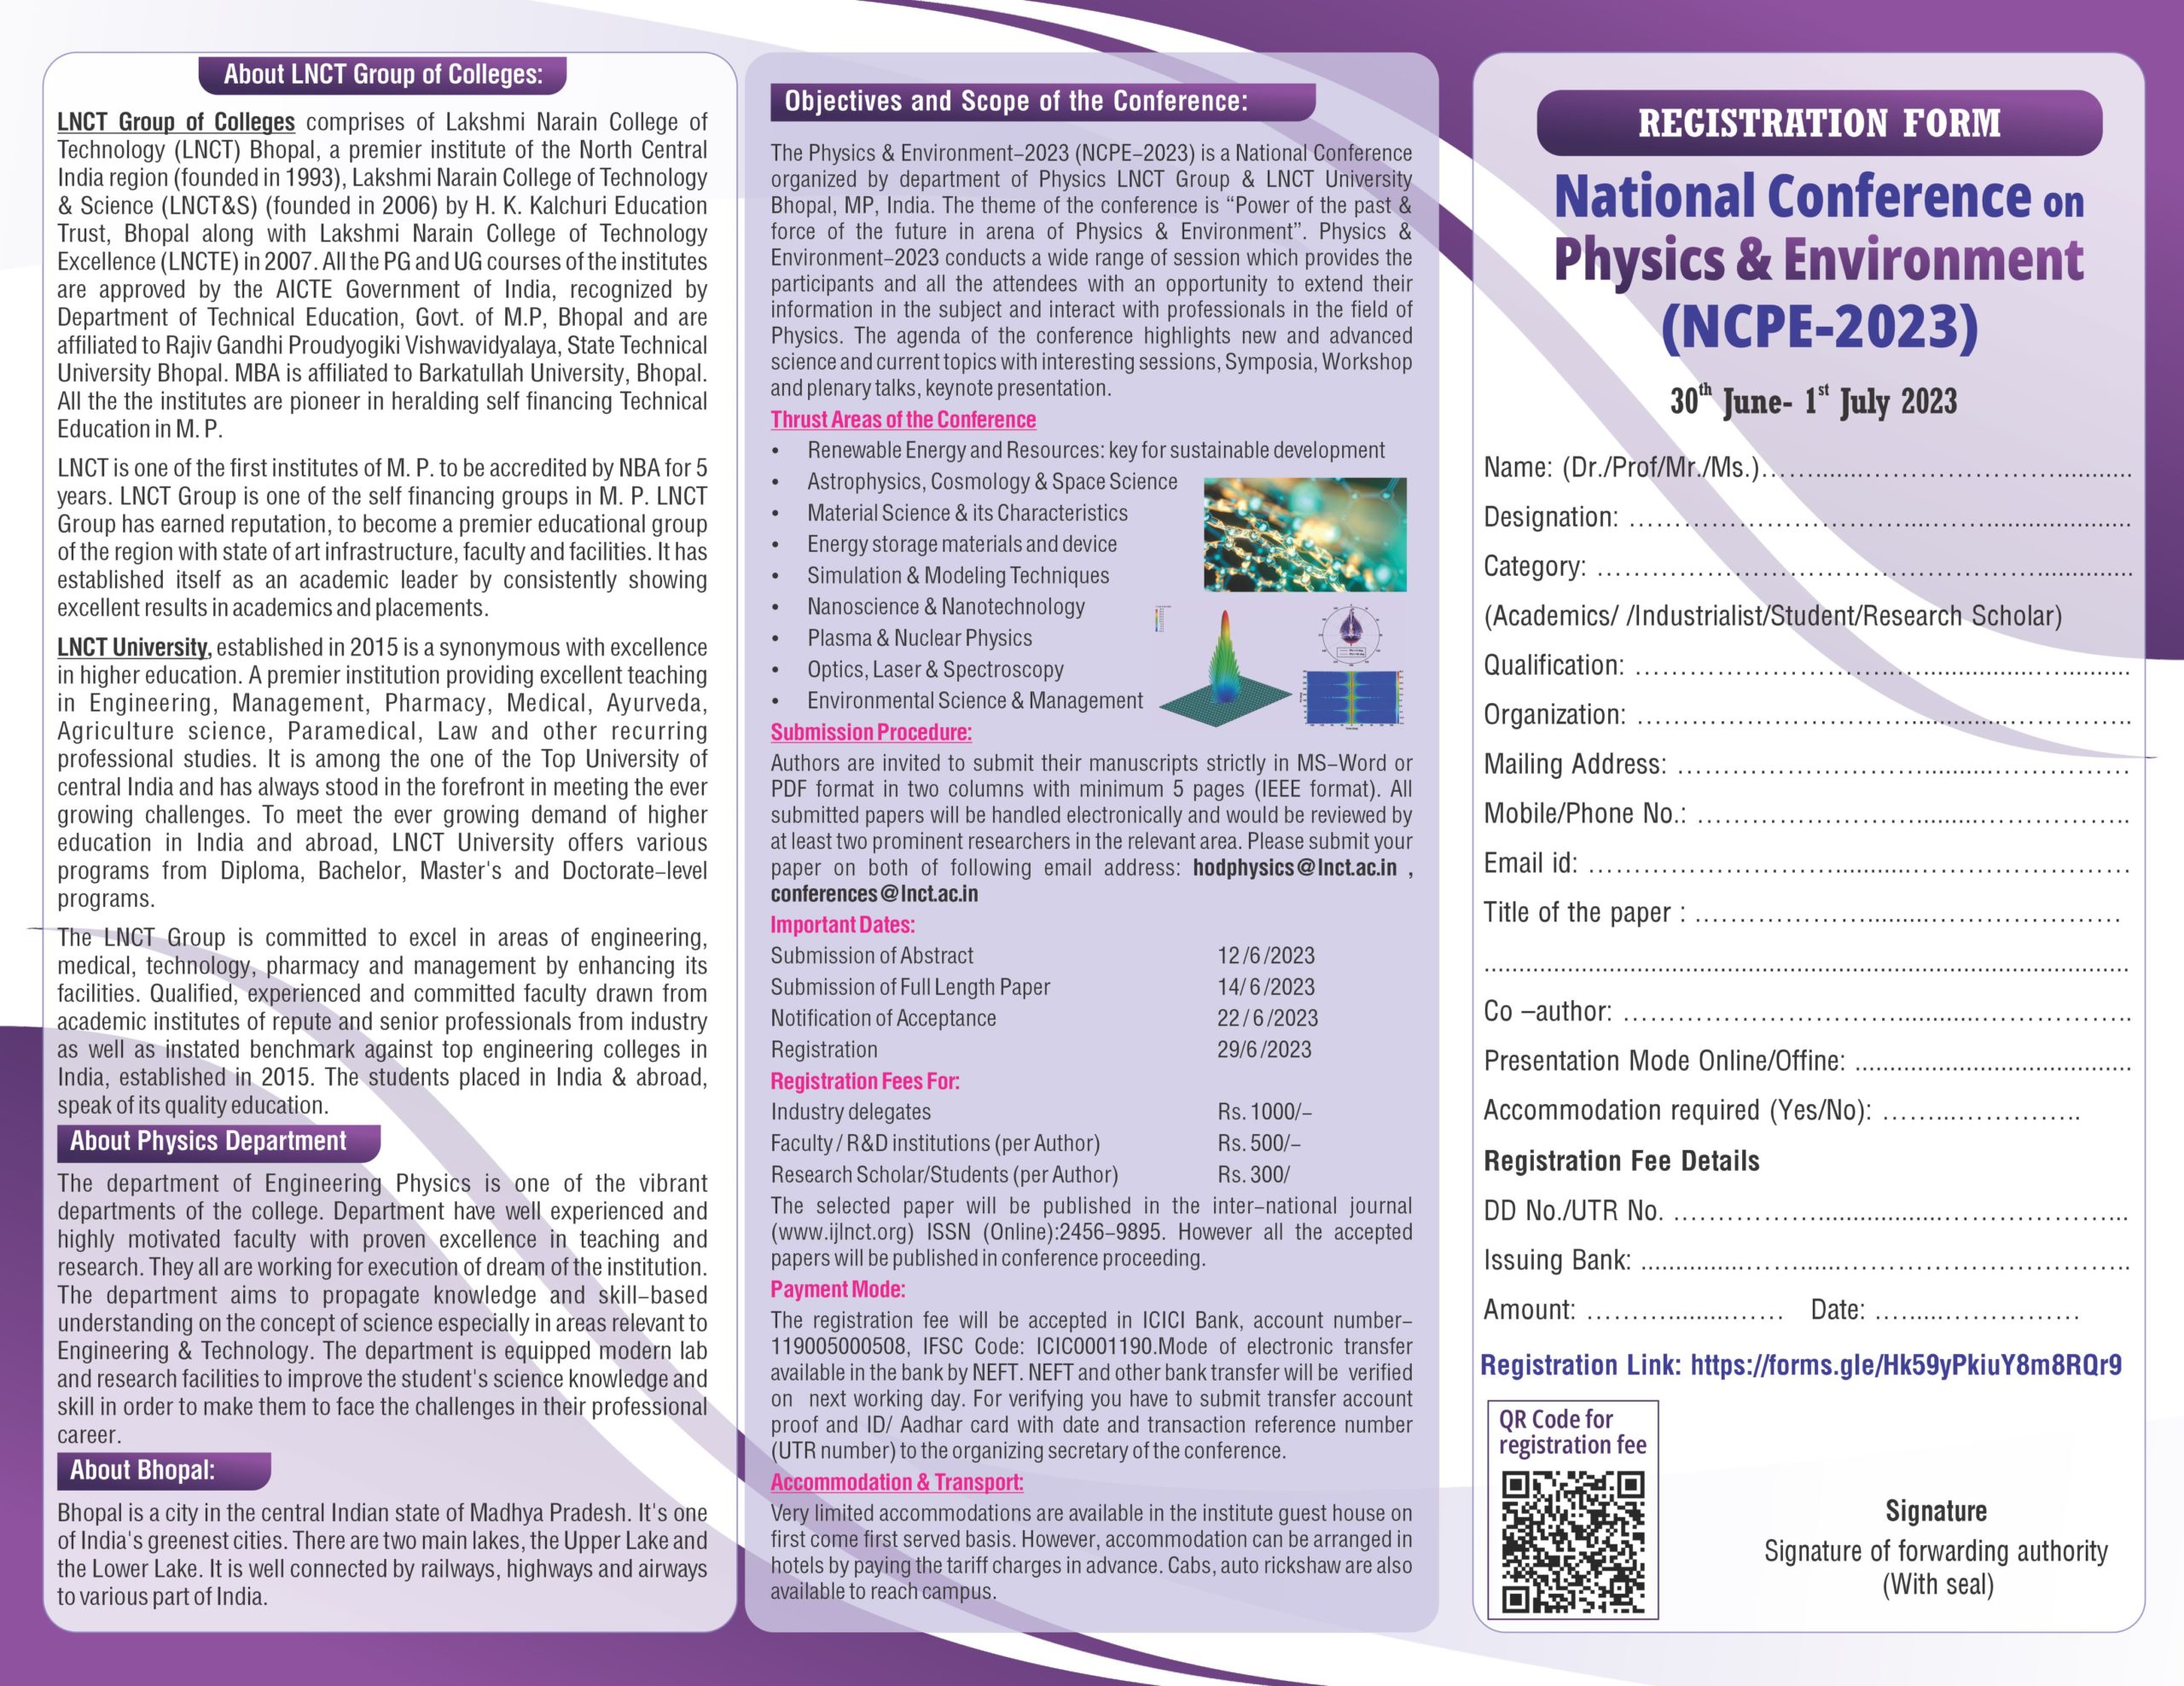 National Conference on Physics & Environment (NCPE-2023) 1